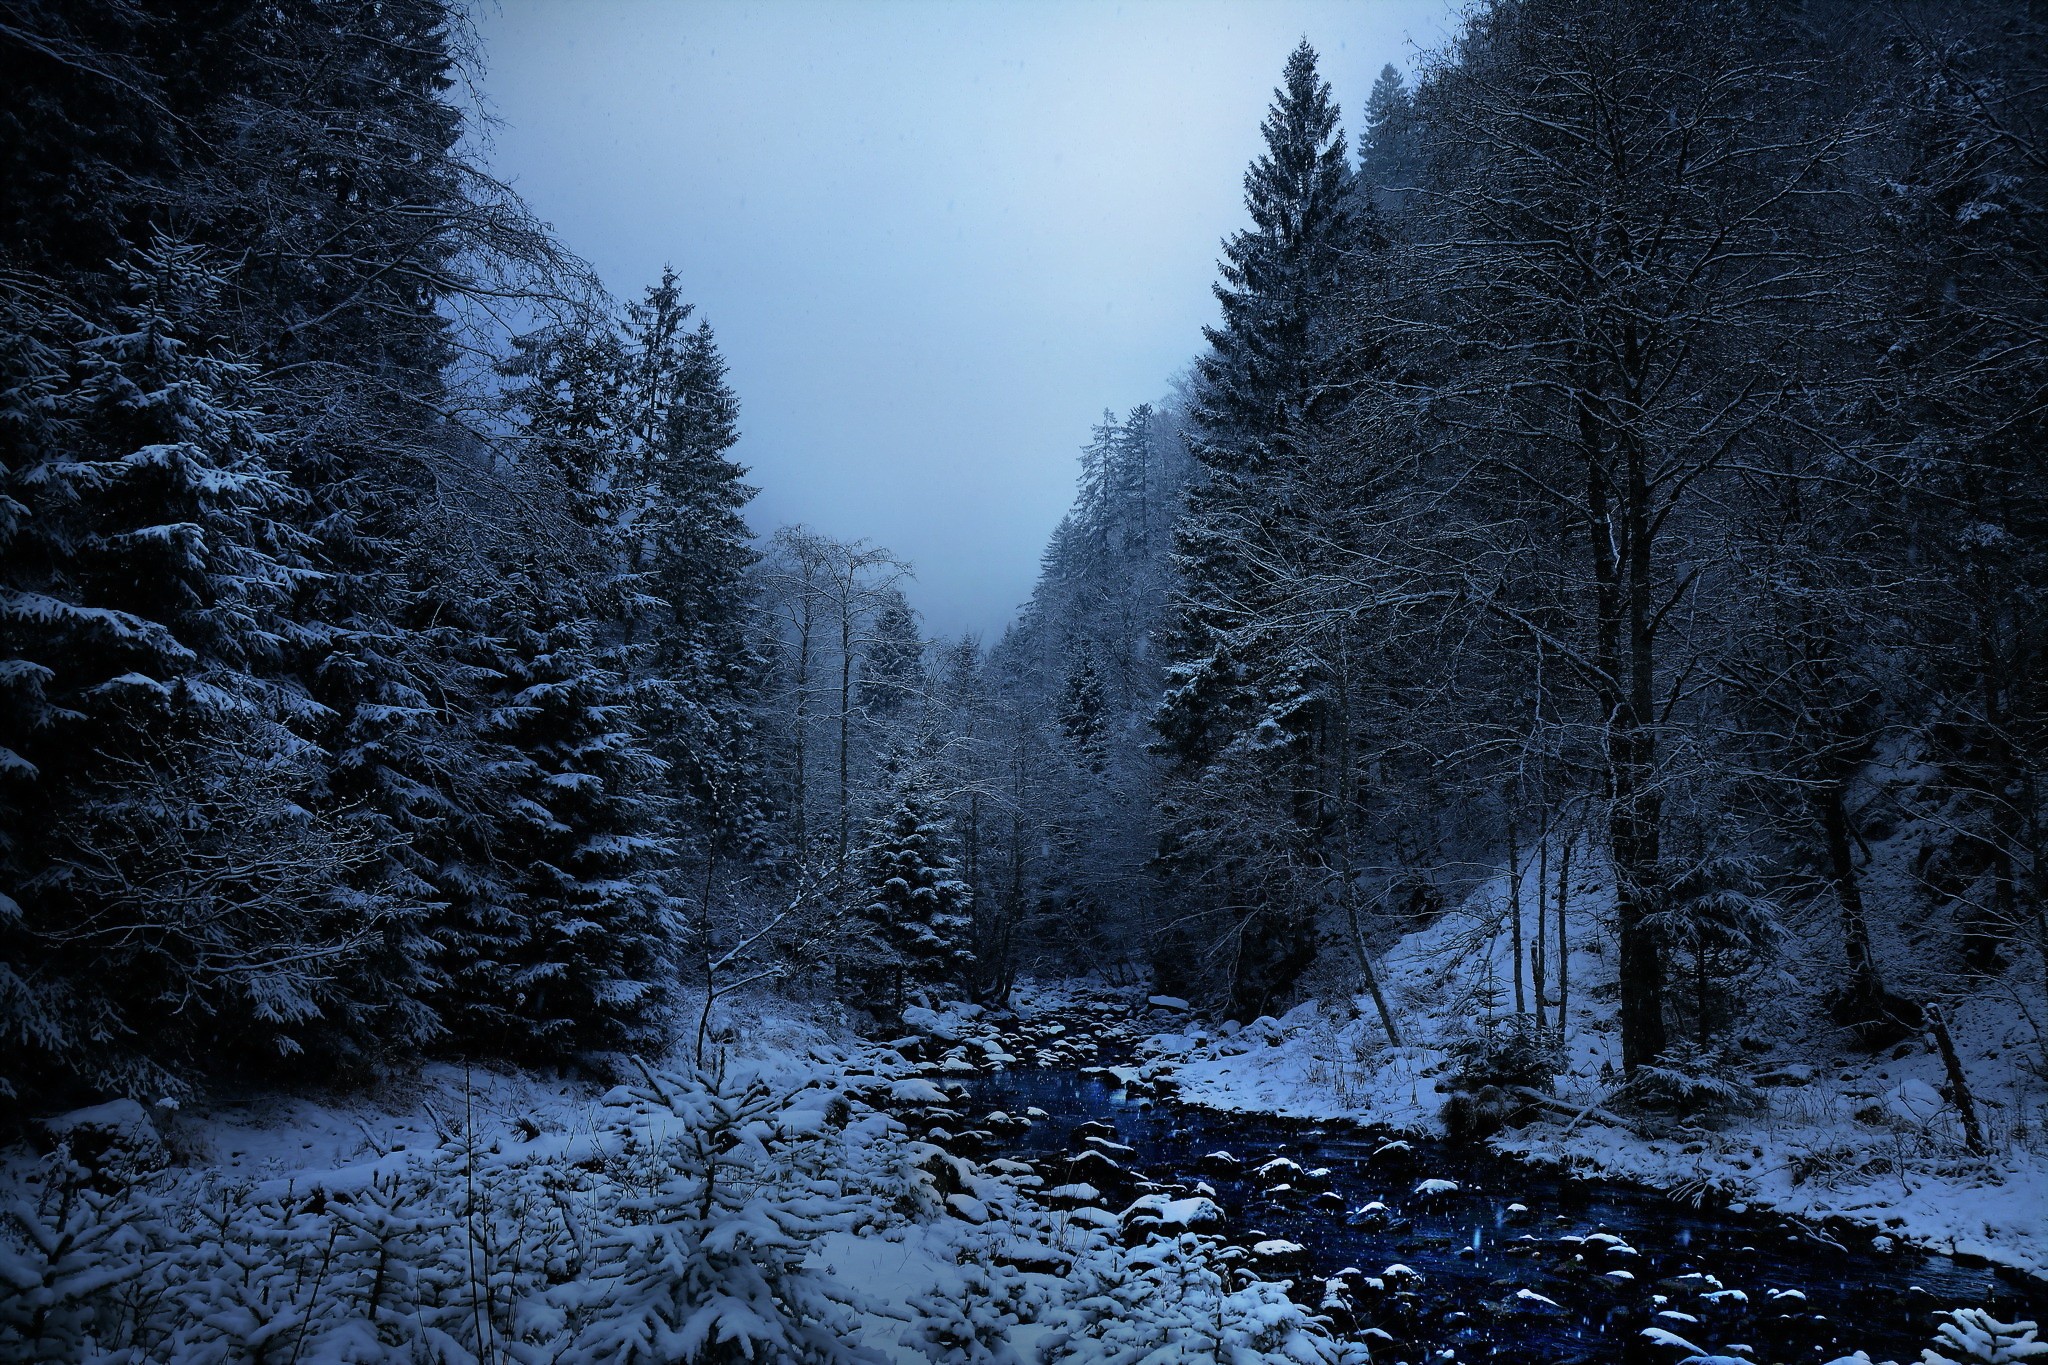 General 2048x1365 landscape forest winter creeks pine trees wilderness nature cold outdoors trees